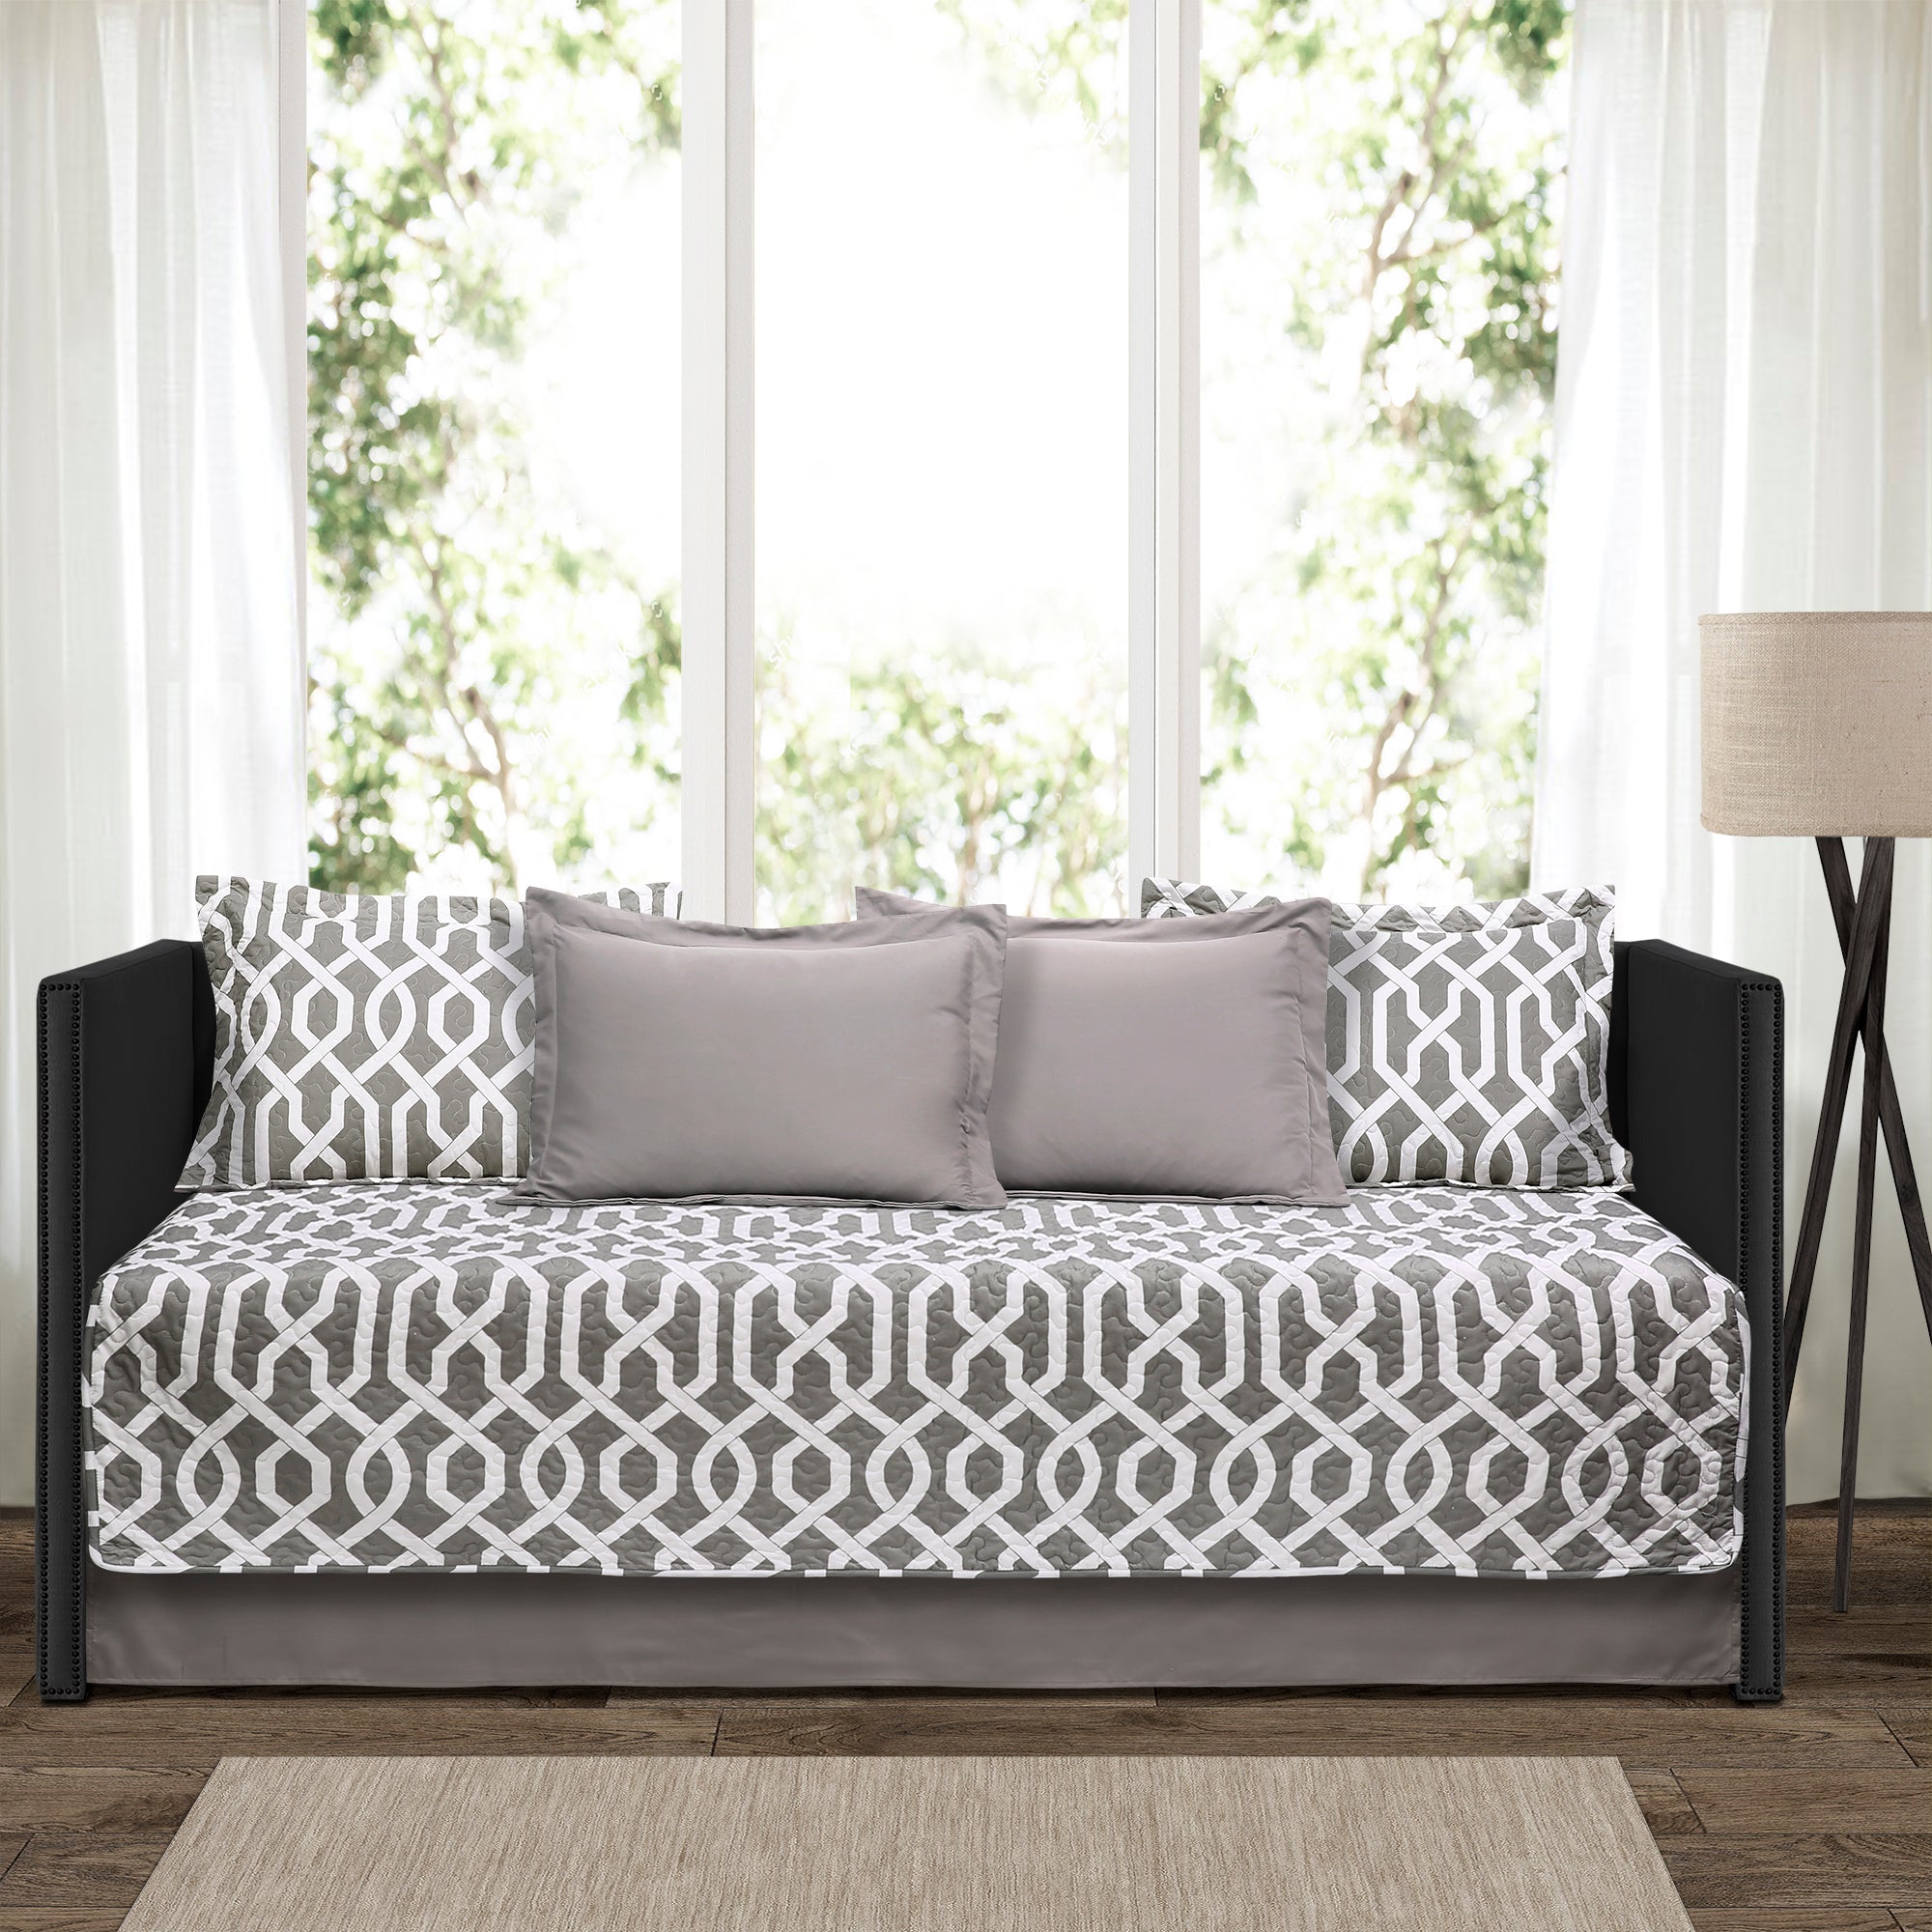 Edward trellis 6Pc Daybed Cover Set